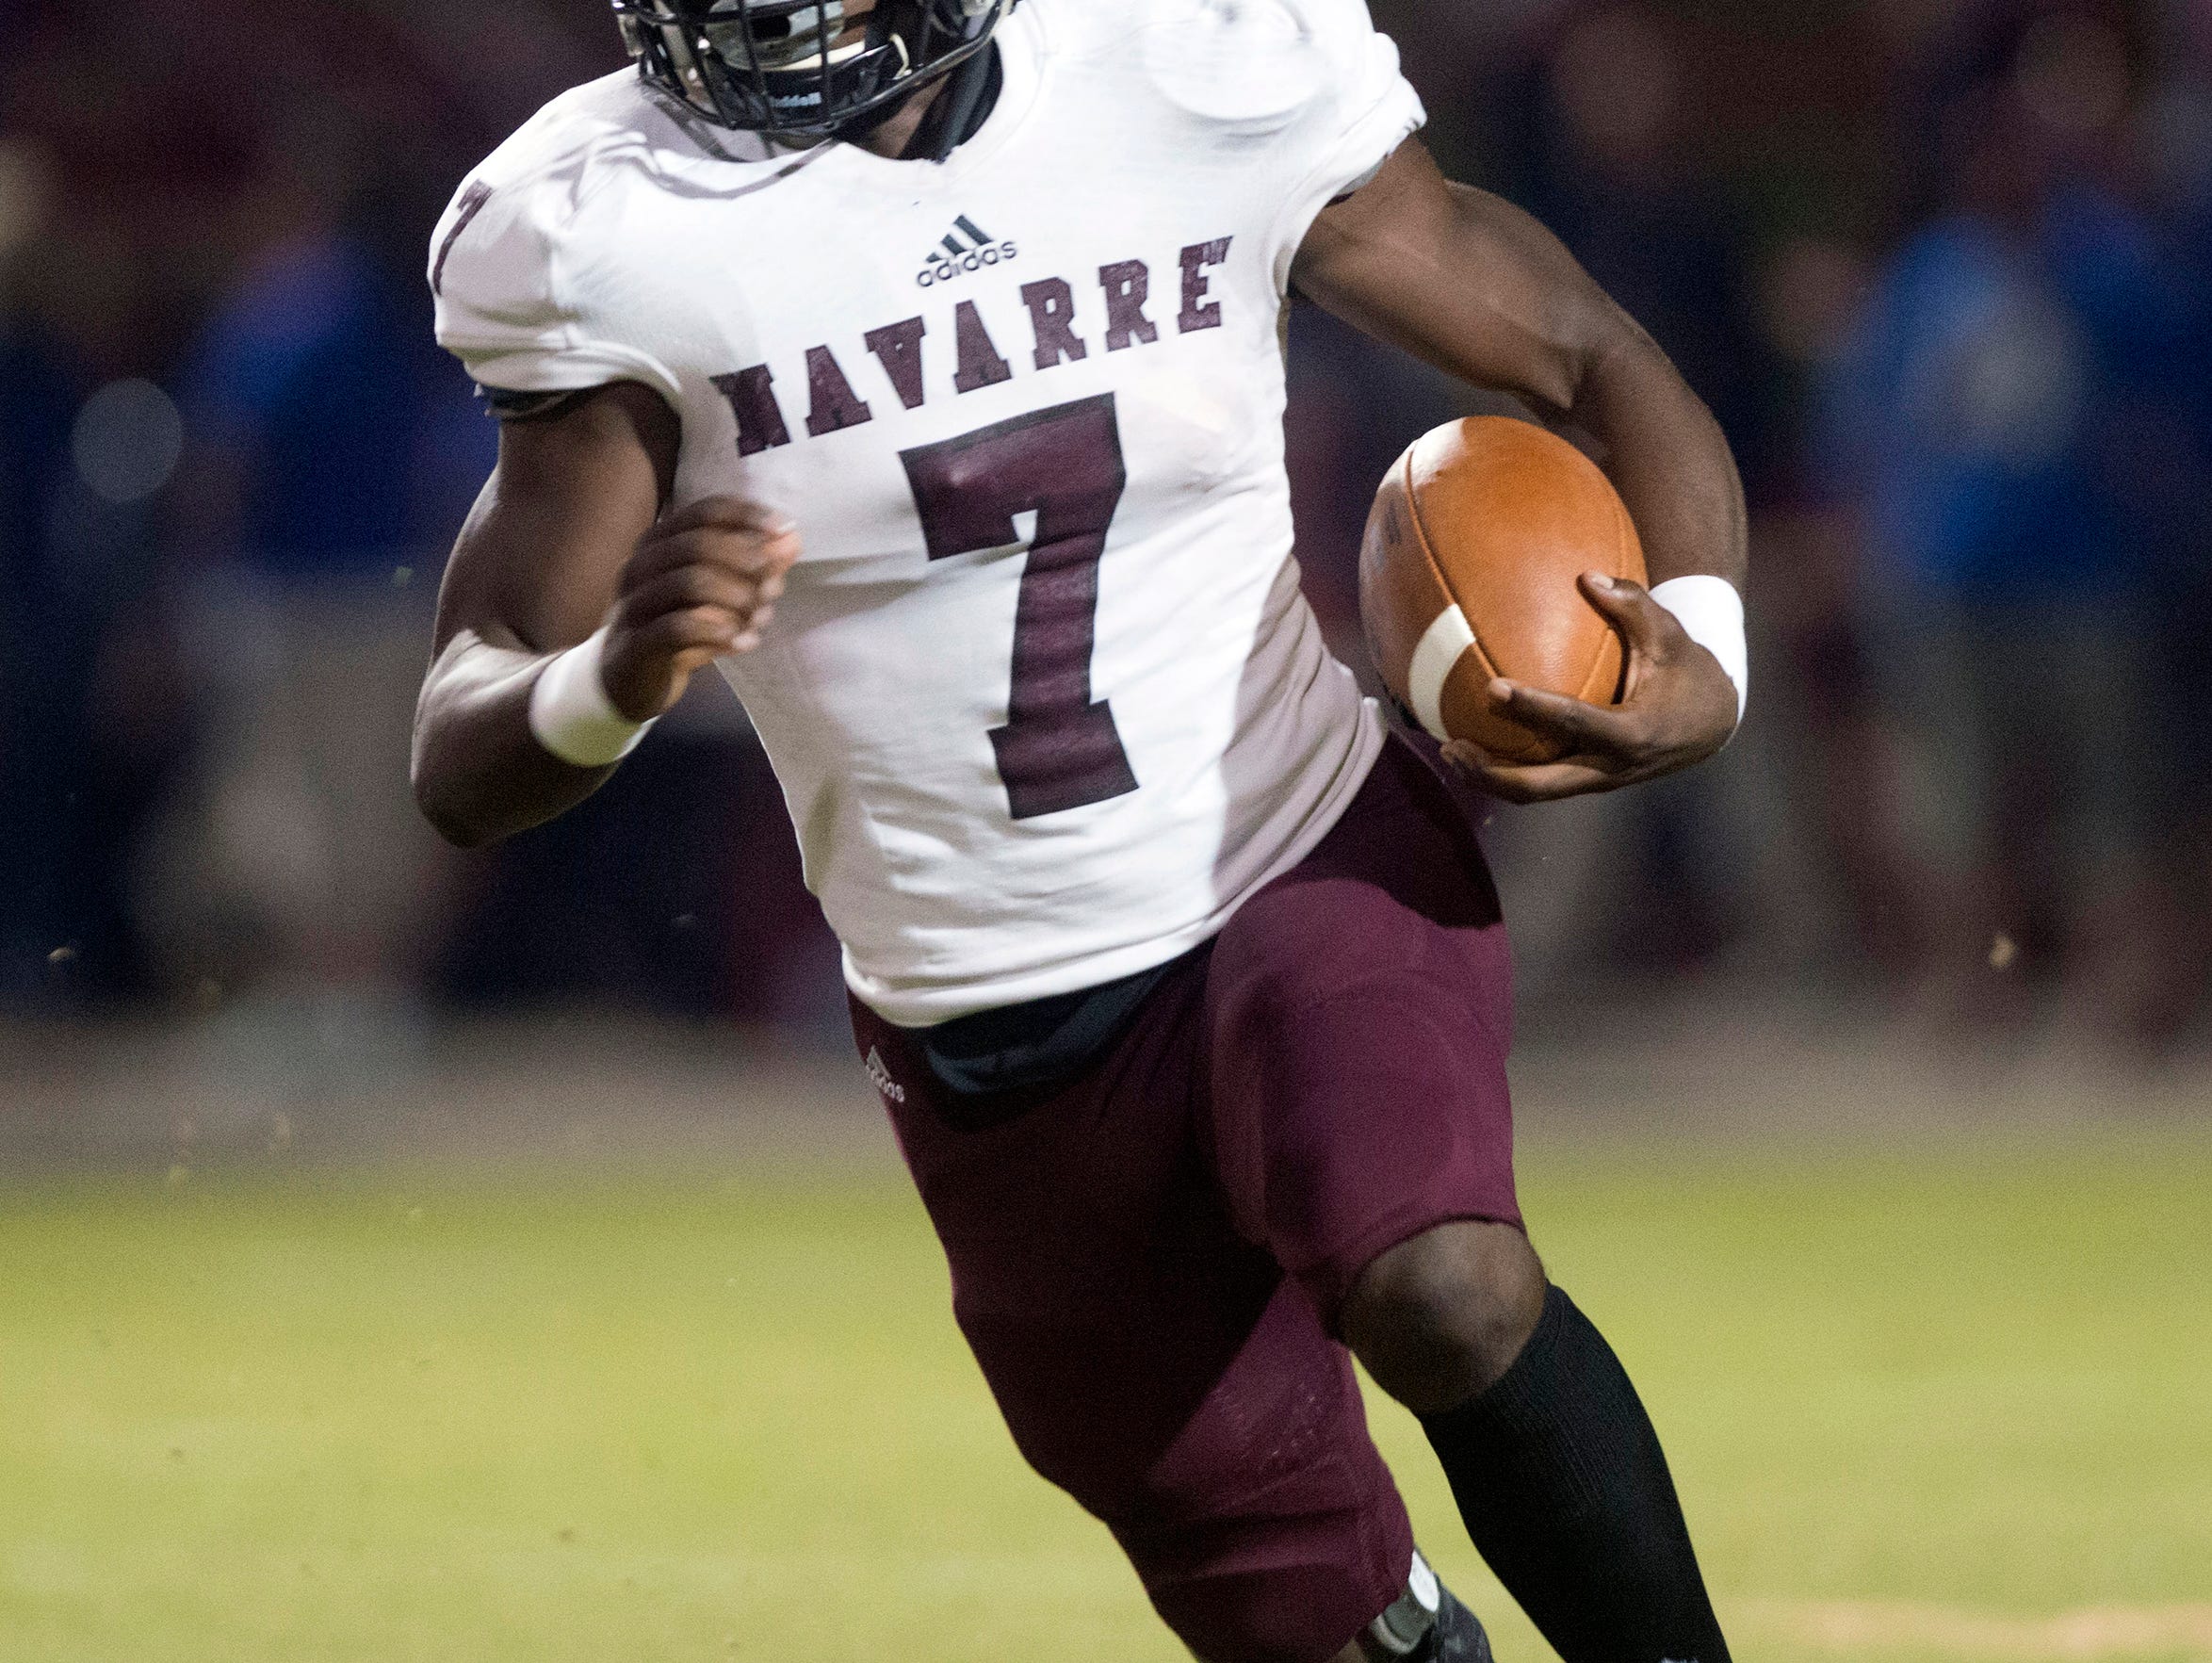 Navarre High School star running back Michael Carter, (No. 7) looks for running room against the Pace High School defense during Friday night's District 2-6A matchup.